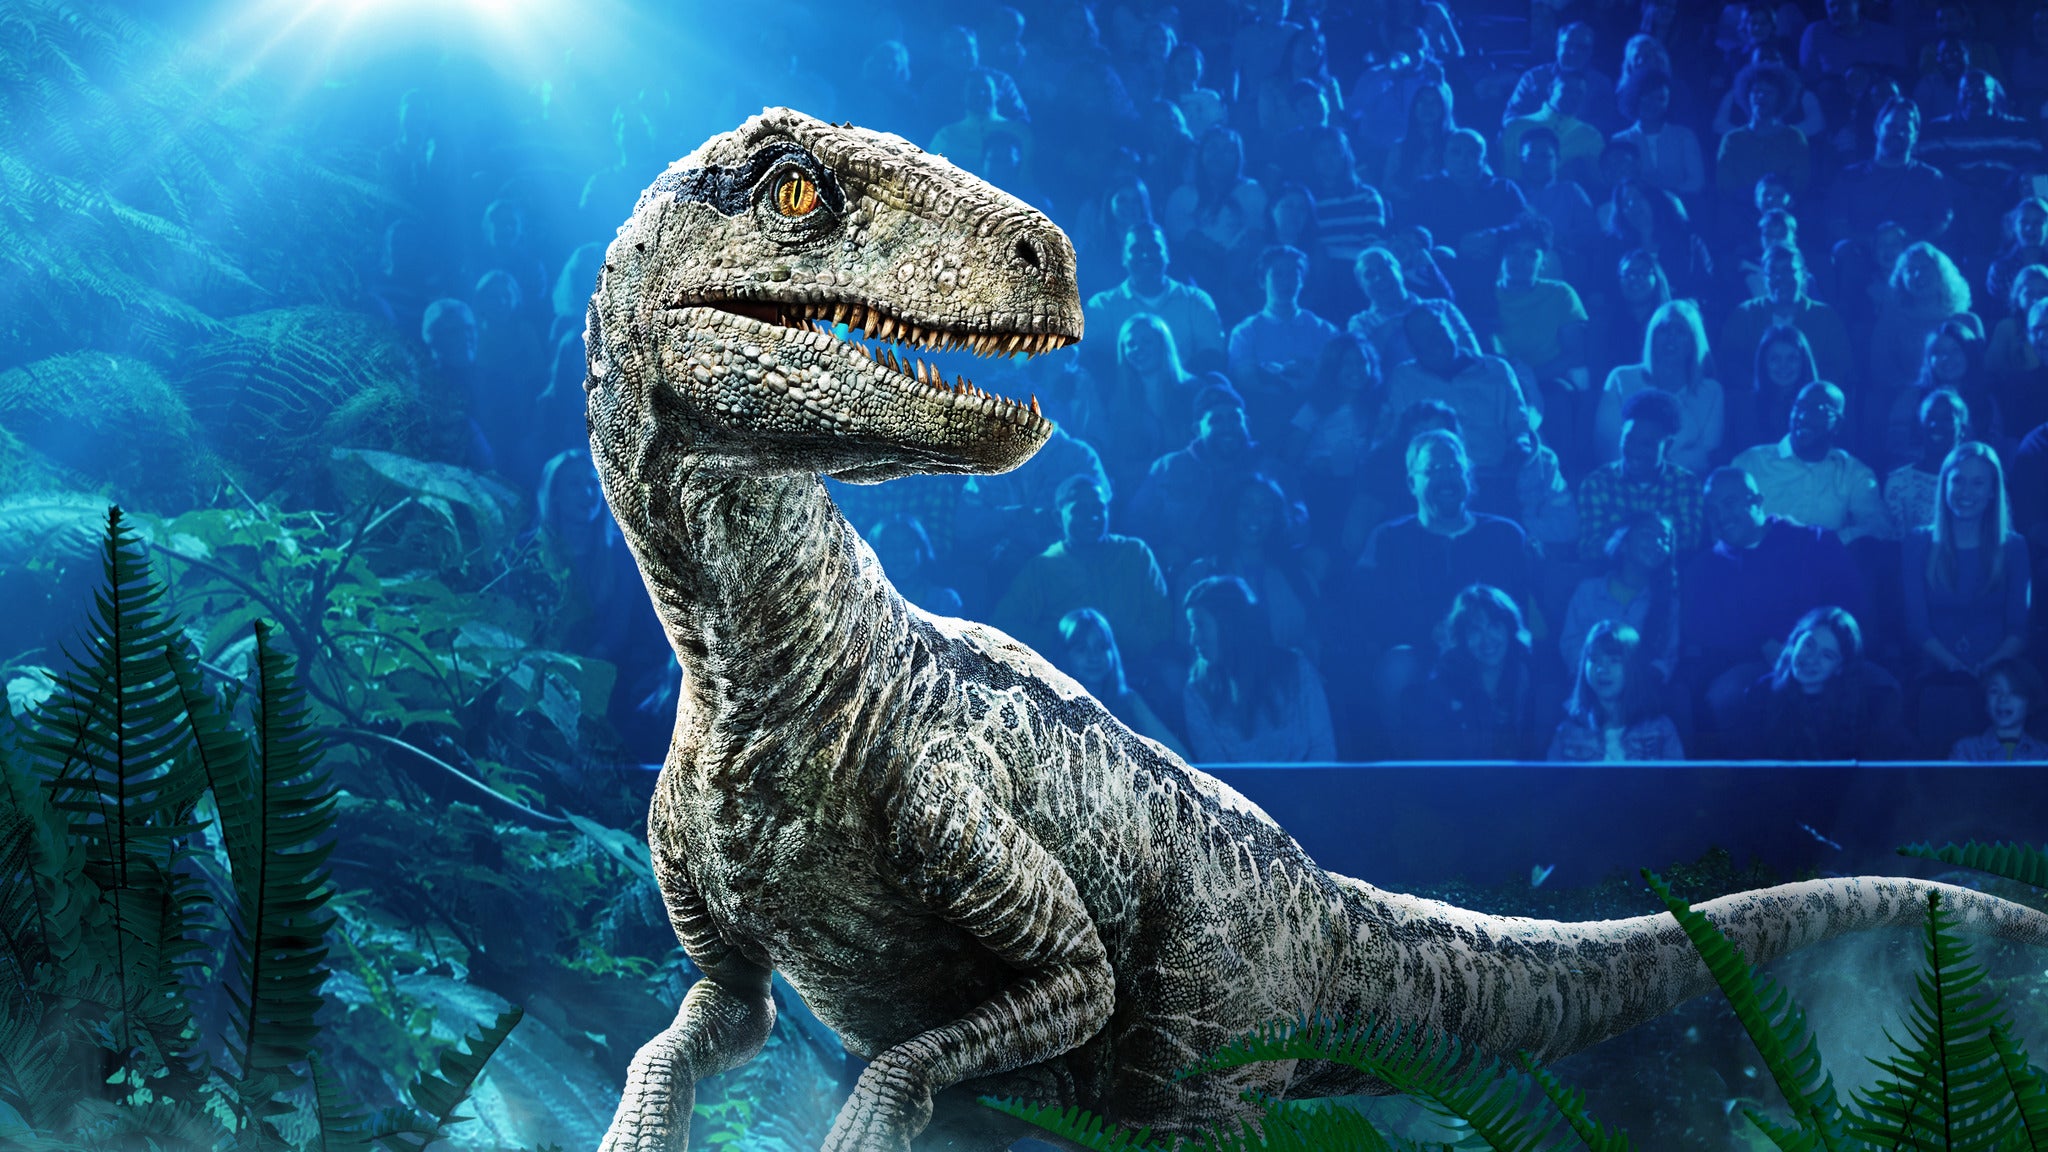 Image used with permission from Ticketmaster | Jurassic World Live Tour tickets